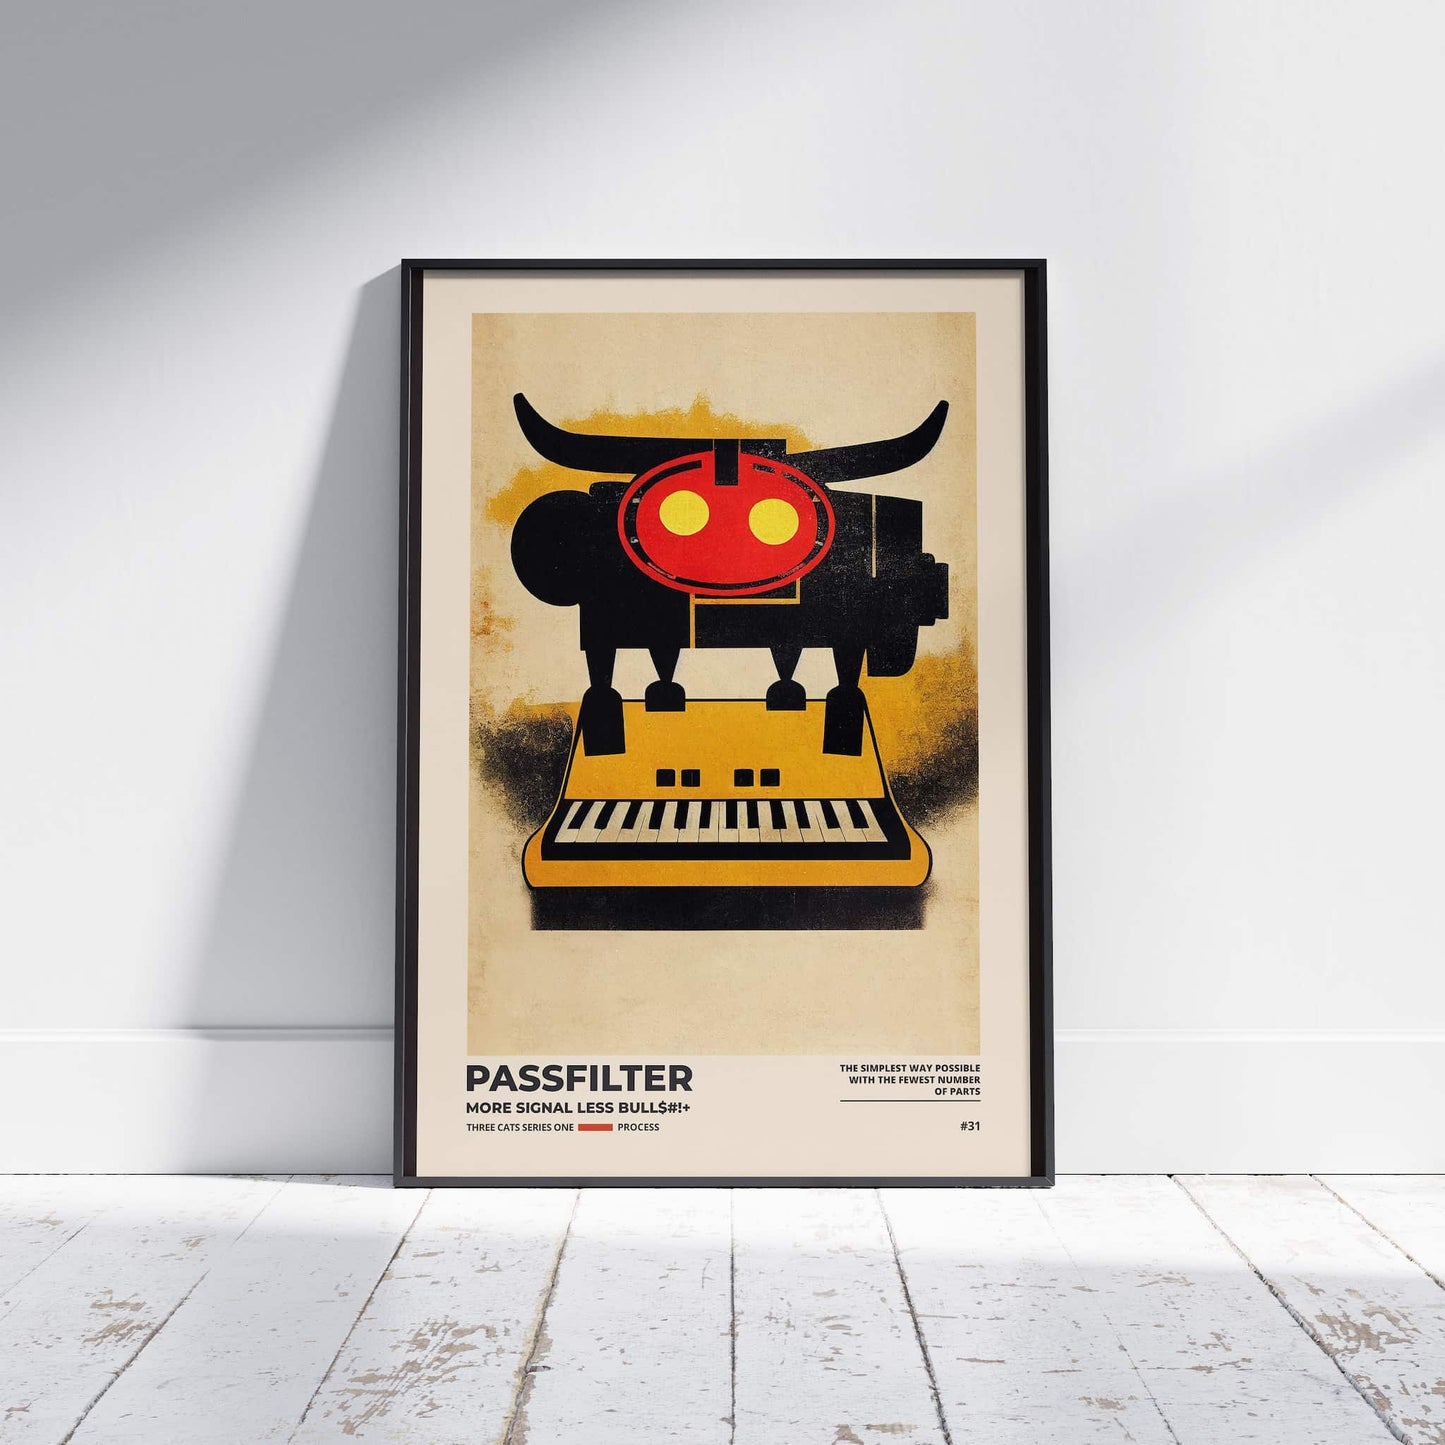 Black framed Passfilter poster sitting on a white wooden floor in a recording studio.